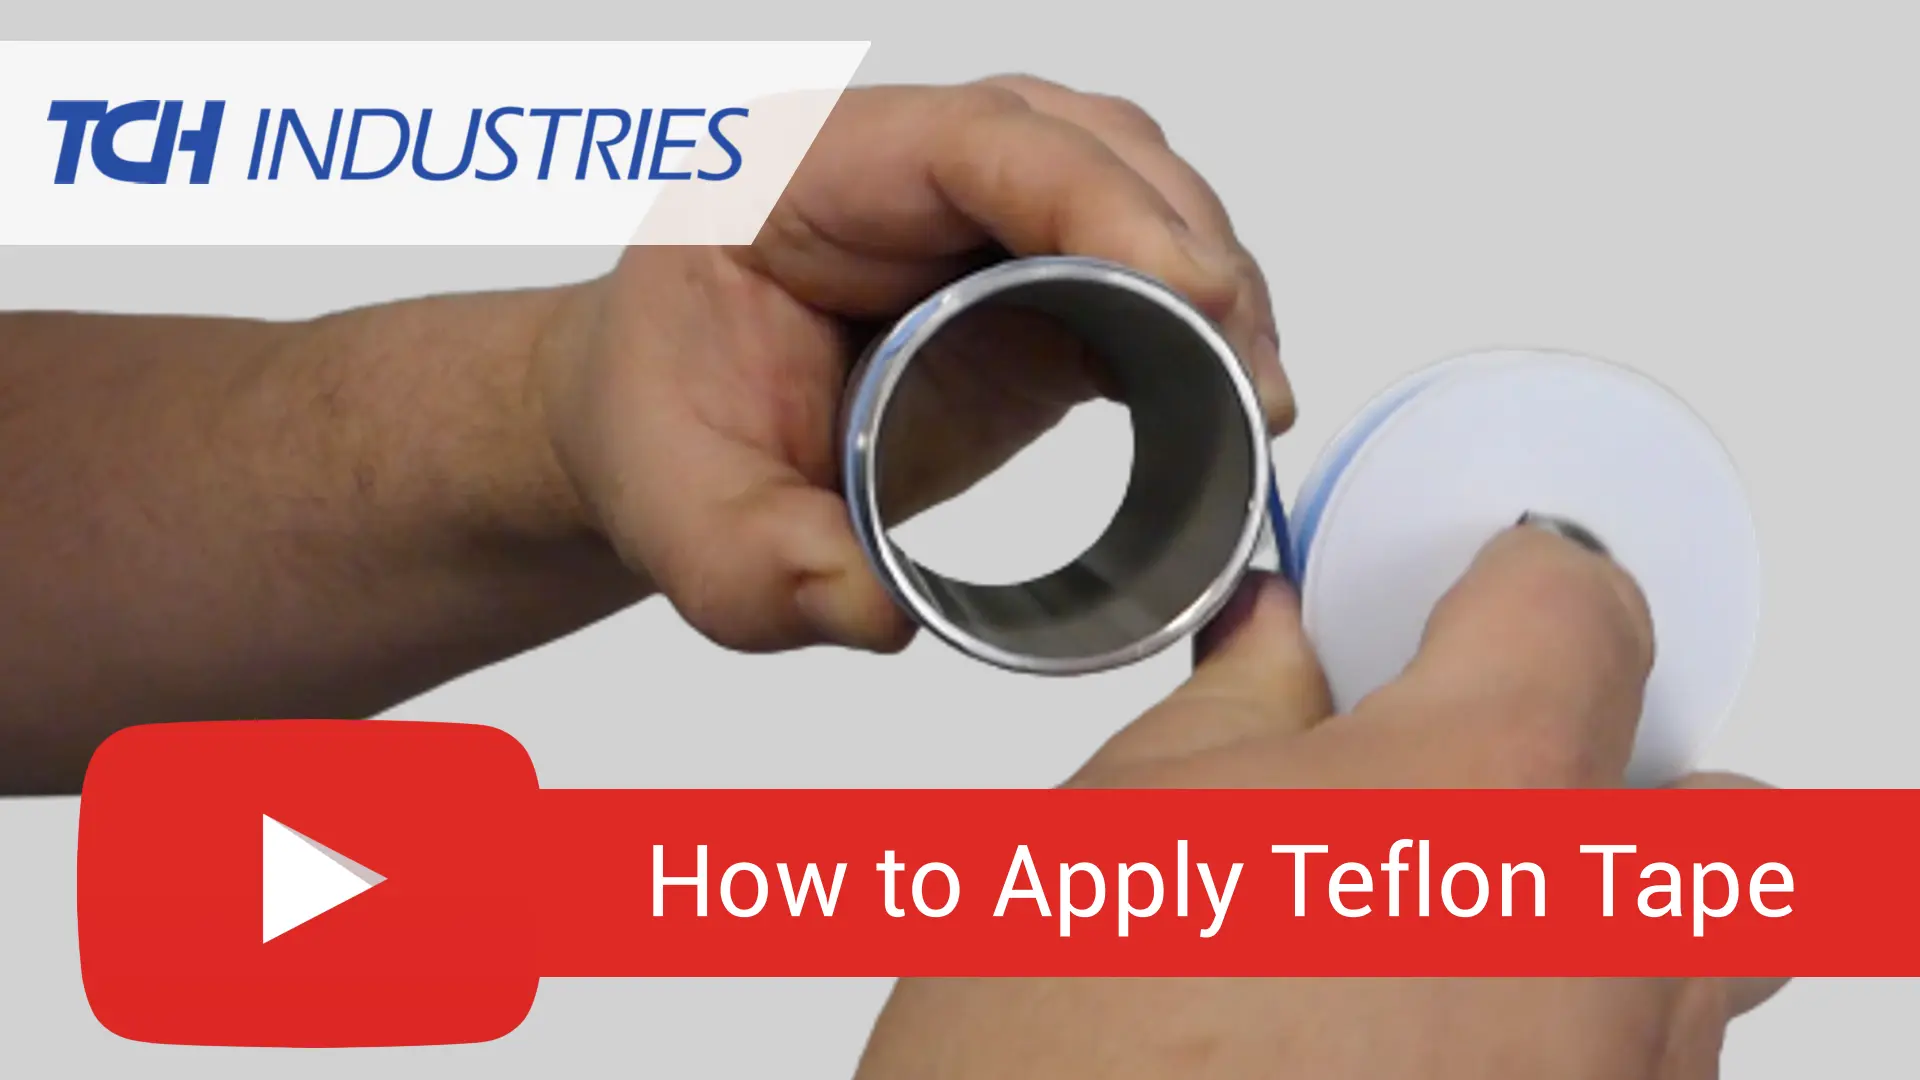 How To Use Teflon Tape - TCH Industries